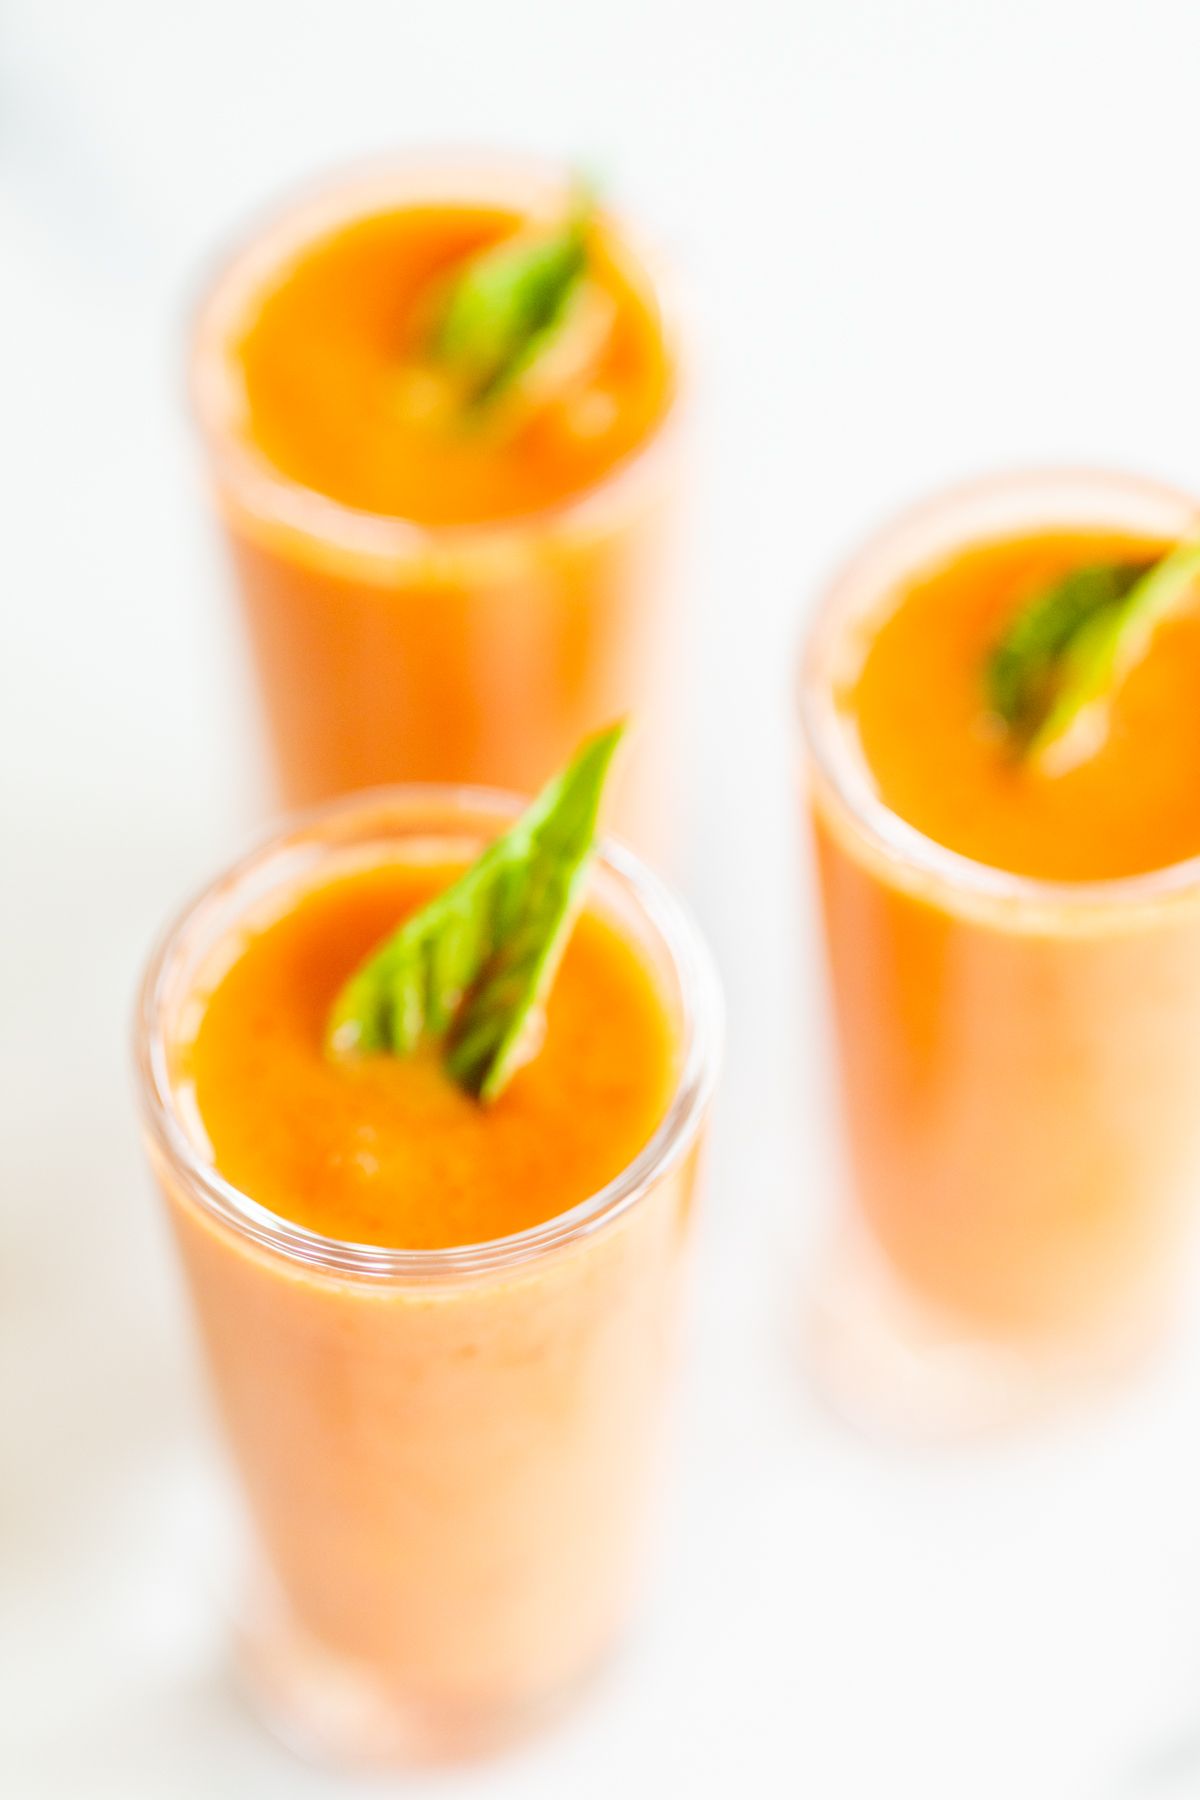 Small glass shooters of creamy tomato soup garnished with fresh basil.